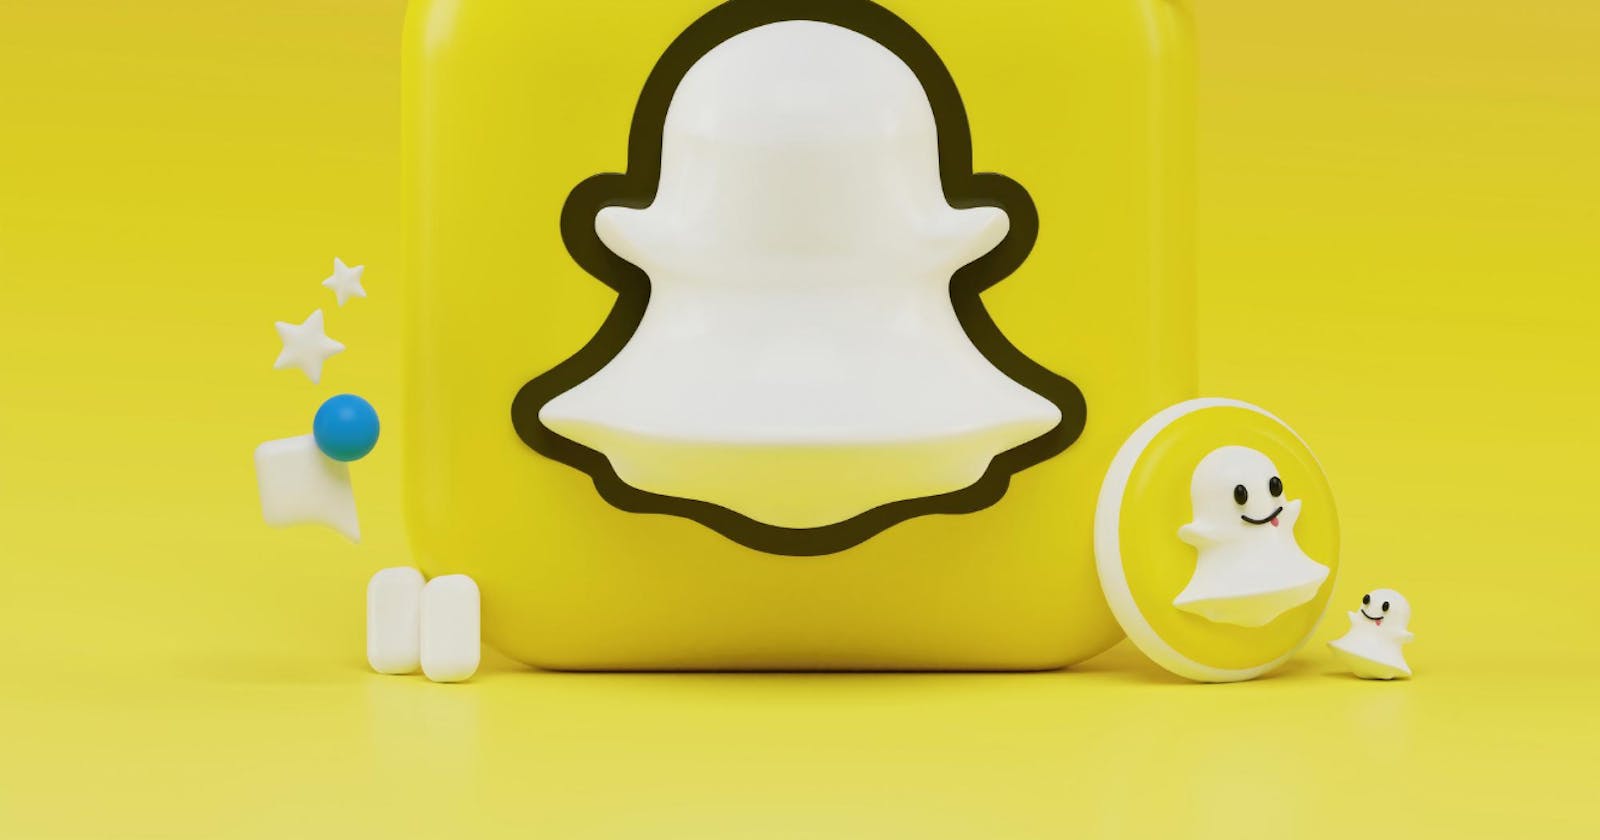 Snapchat Login History: A Timeline of Security and Convenience